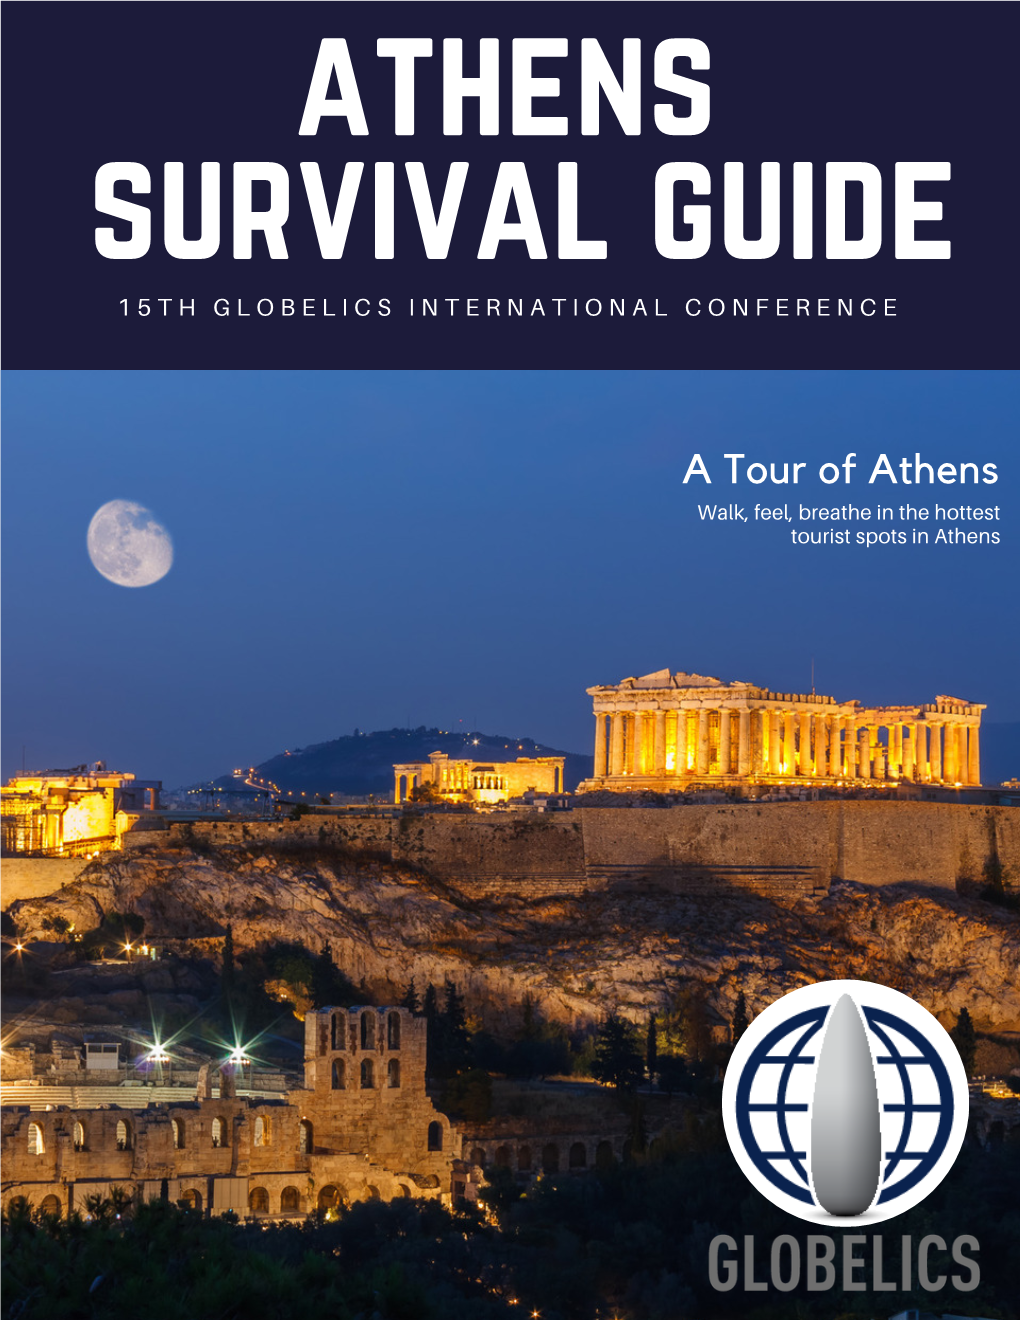 A Tour of Athens Walk, Feel, Breathe in the Hottest Tourist Spots in Athens PAGE 1 ATHENS SURVIVAL GUIDE